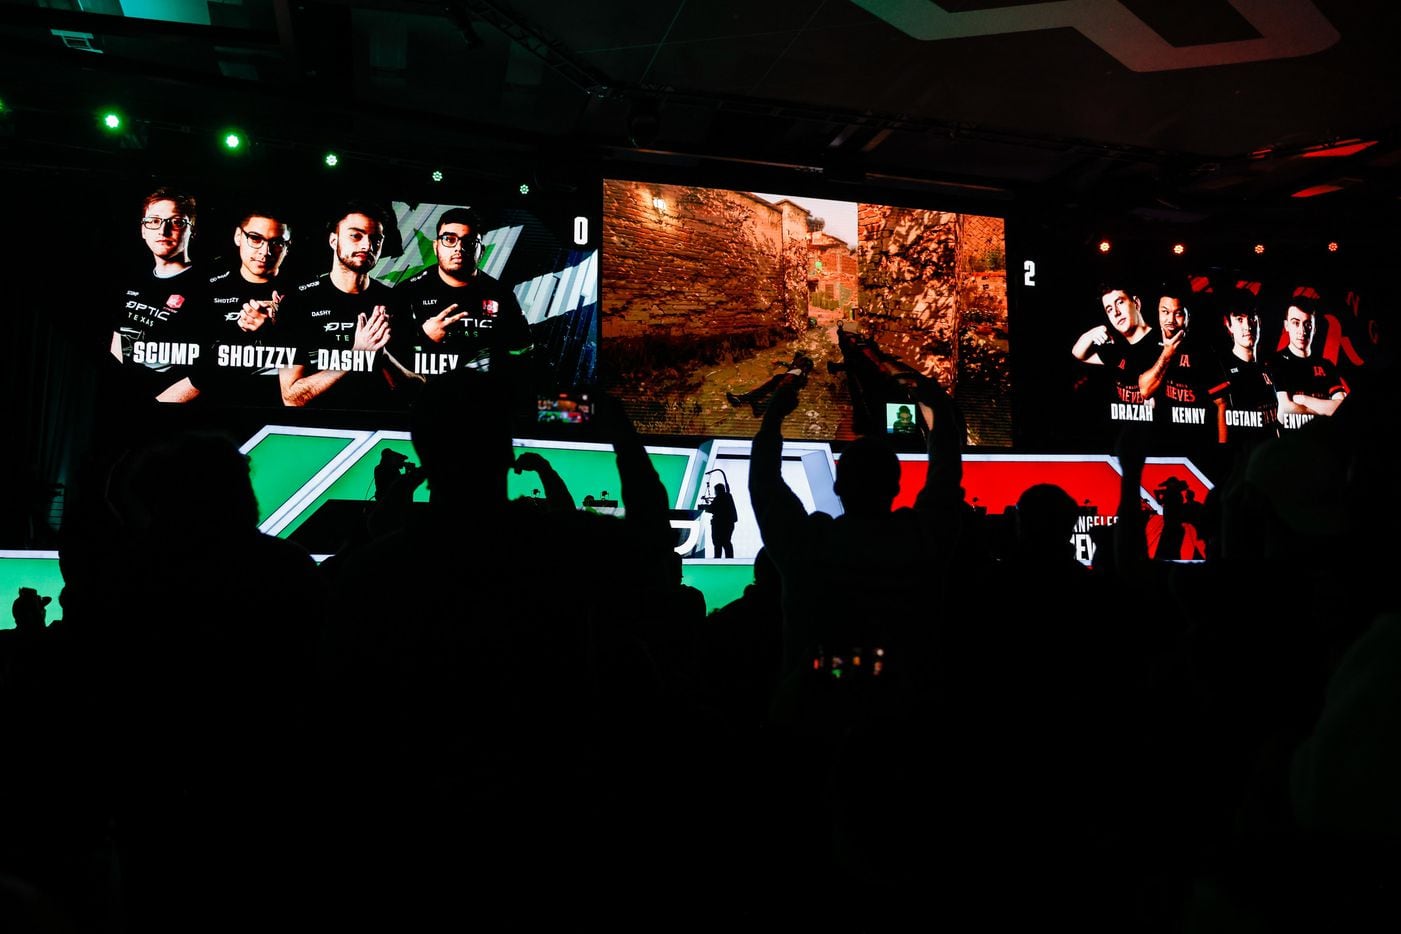 OpTic Texas fans reacts as the team wins a match over Los Angeles Thieves during a Call of Duty League at Esports Stadium Arlington in Arlington on Saturday, January 22, 2022.